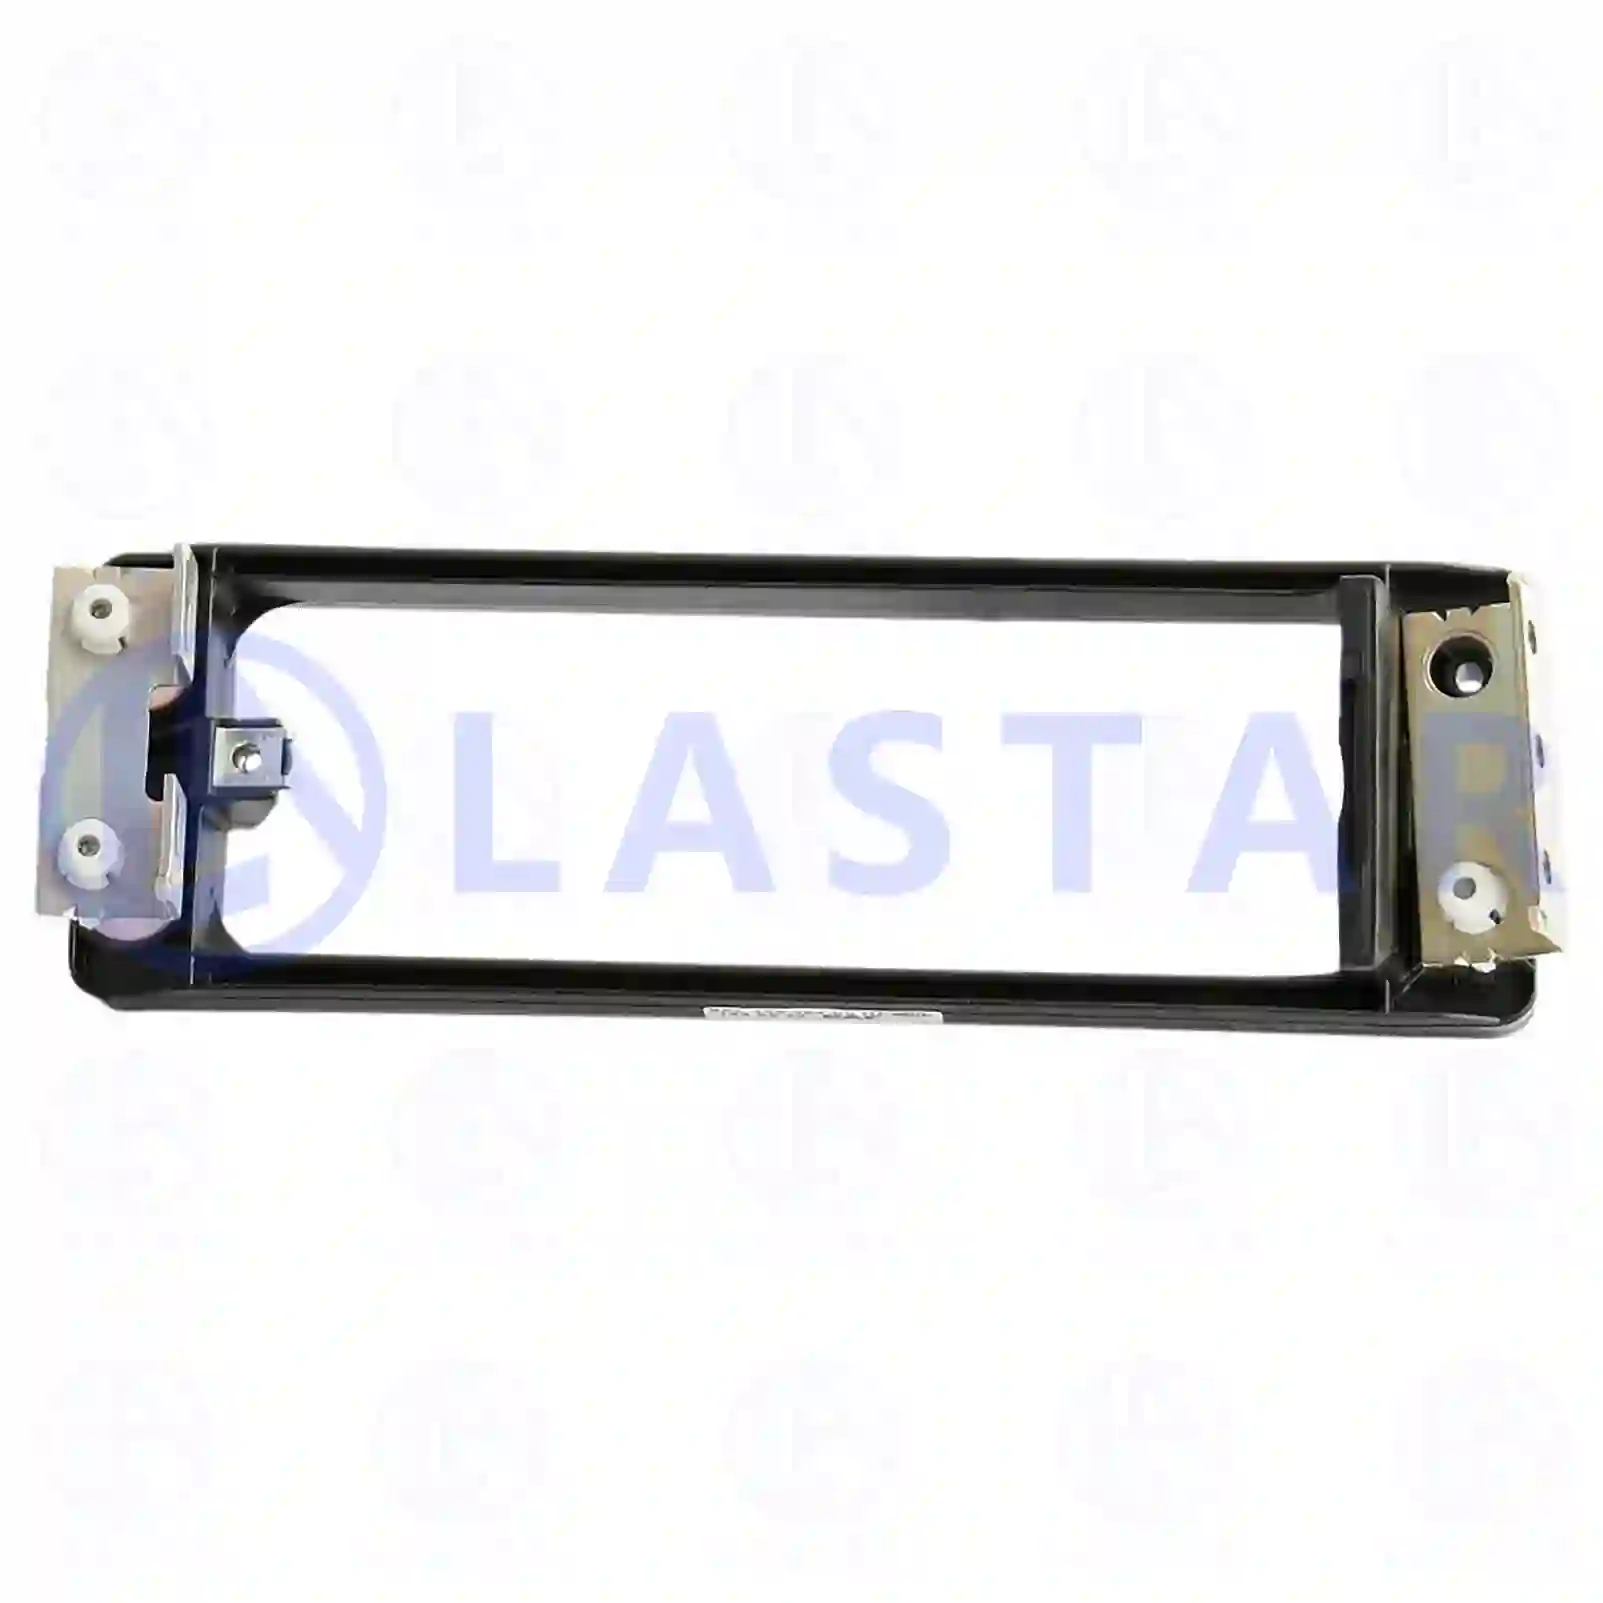 Bracket, auxiliary lamp, right, 77712574, 1328859, 1334109, 1381703, 1436684, 1449529, ZG40005-0008 ||  77712574 Lastar Spare Part | Truck Spare Parts, Auotomotive Spare Parts Bracket, auxiliary lamp, right, 77712574, 1328859, 1334109, 1381703, 1436684, 1449529, ZG40005-0008 ||  77712574 Lastar Spare Part | Truck Spare Parts, Auotomotive Spare Parts